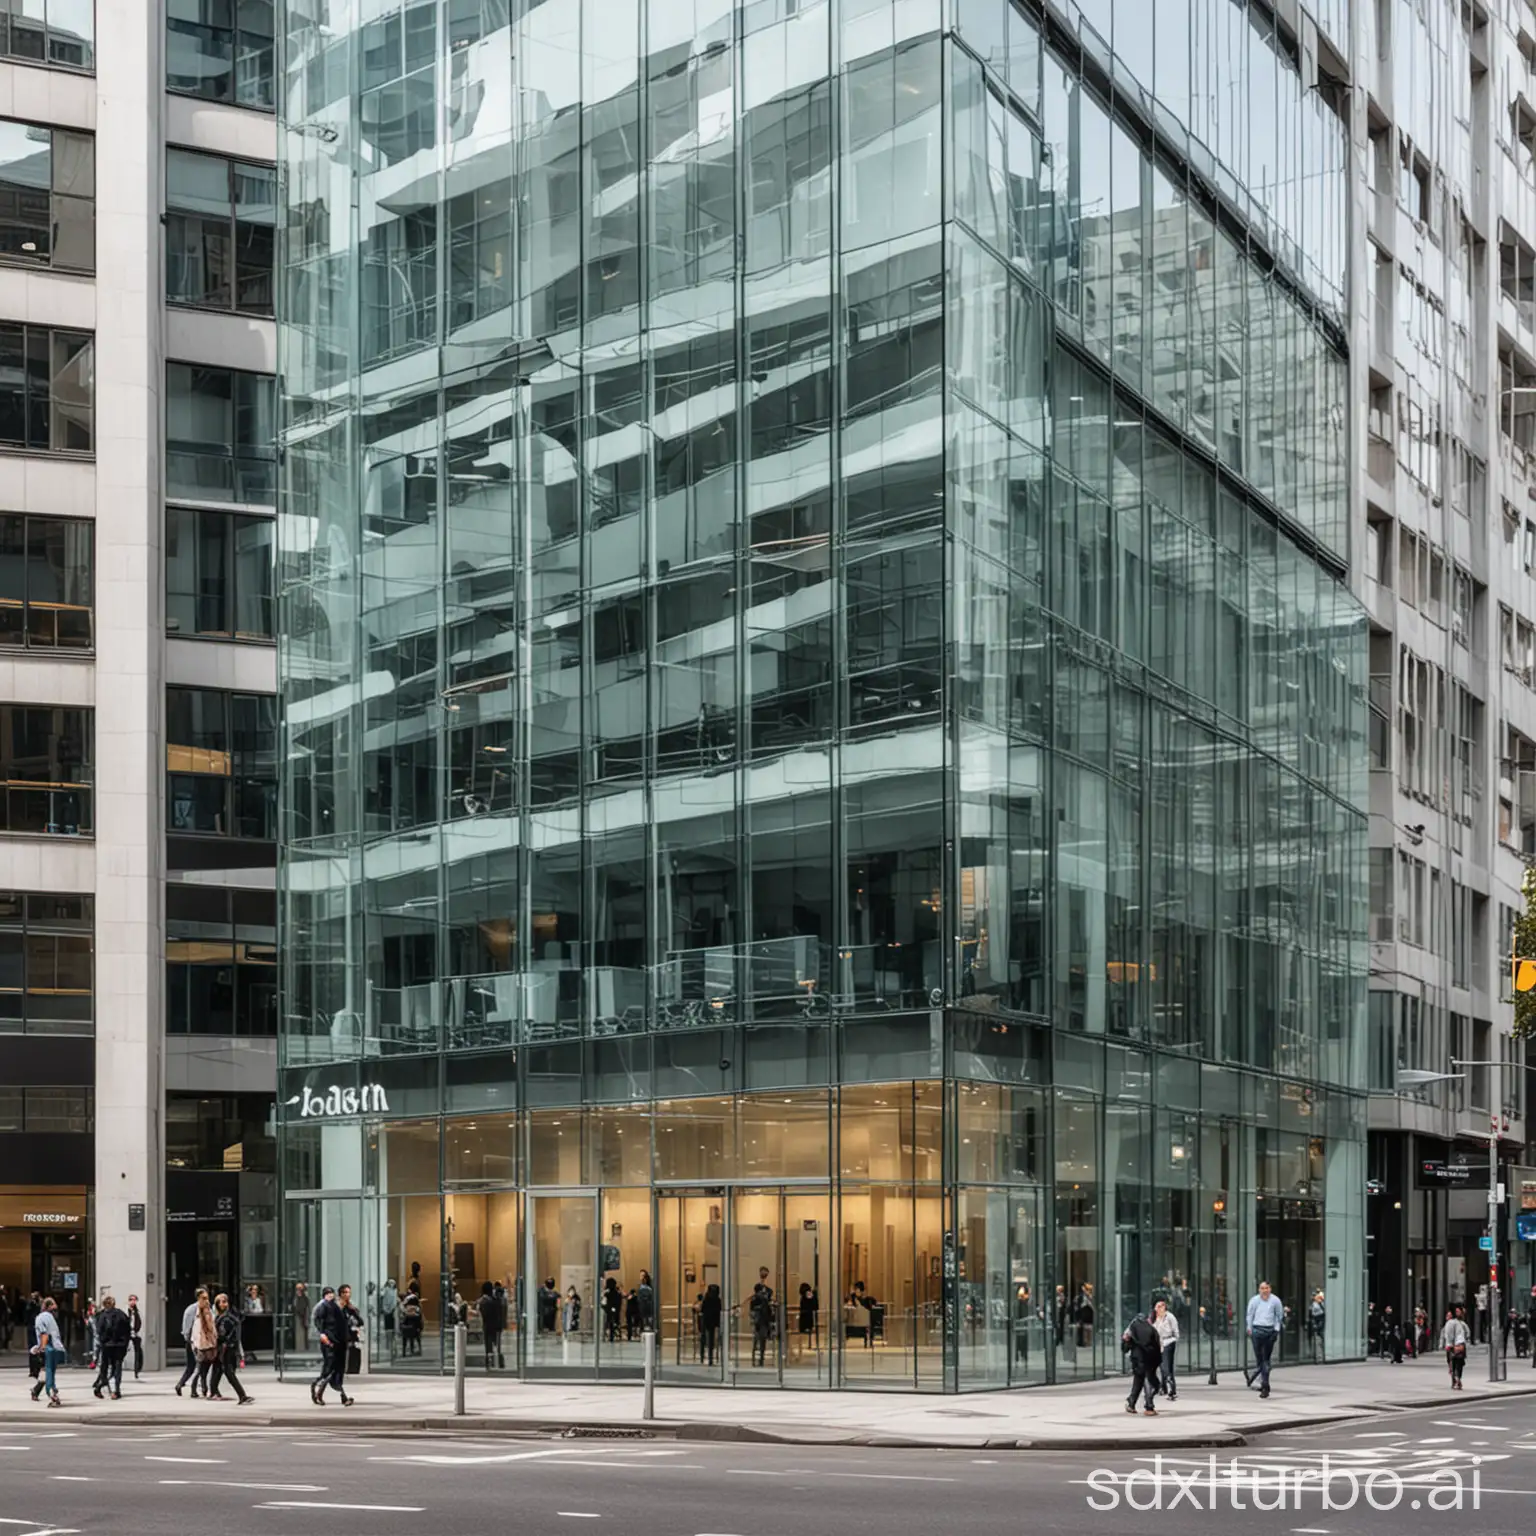 A brand new, modern office building with a glass facade and a large sign stands in the middle of a busy city street.